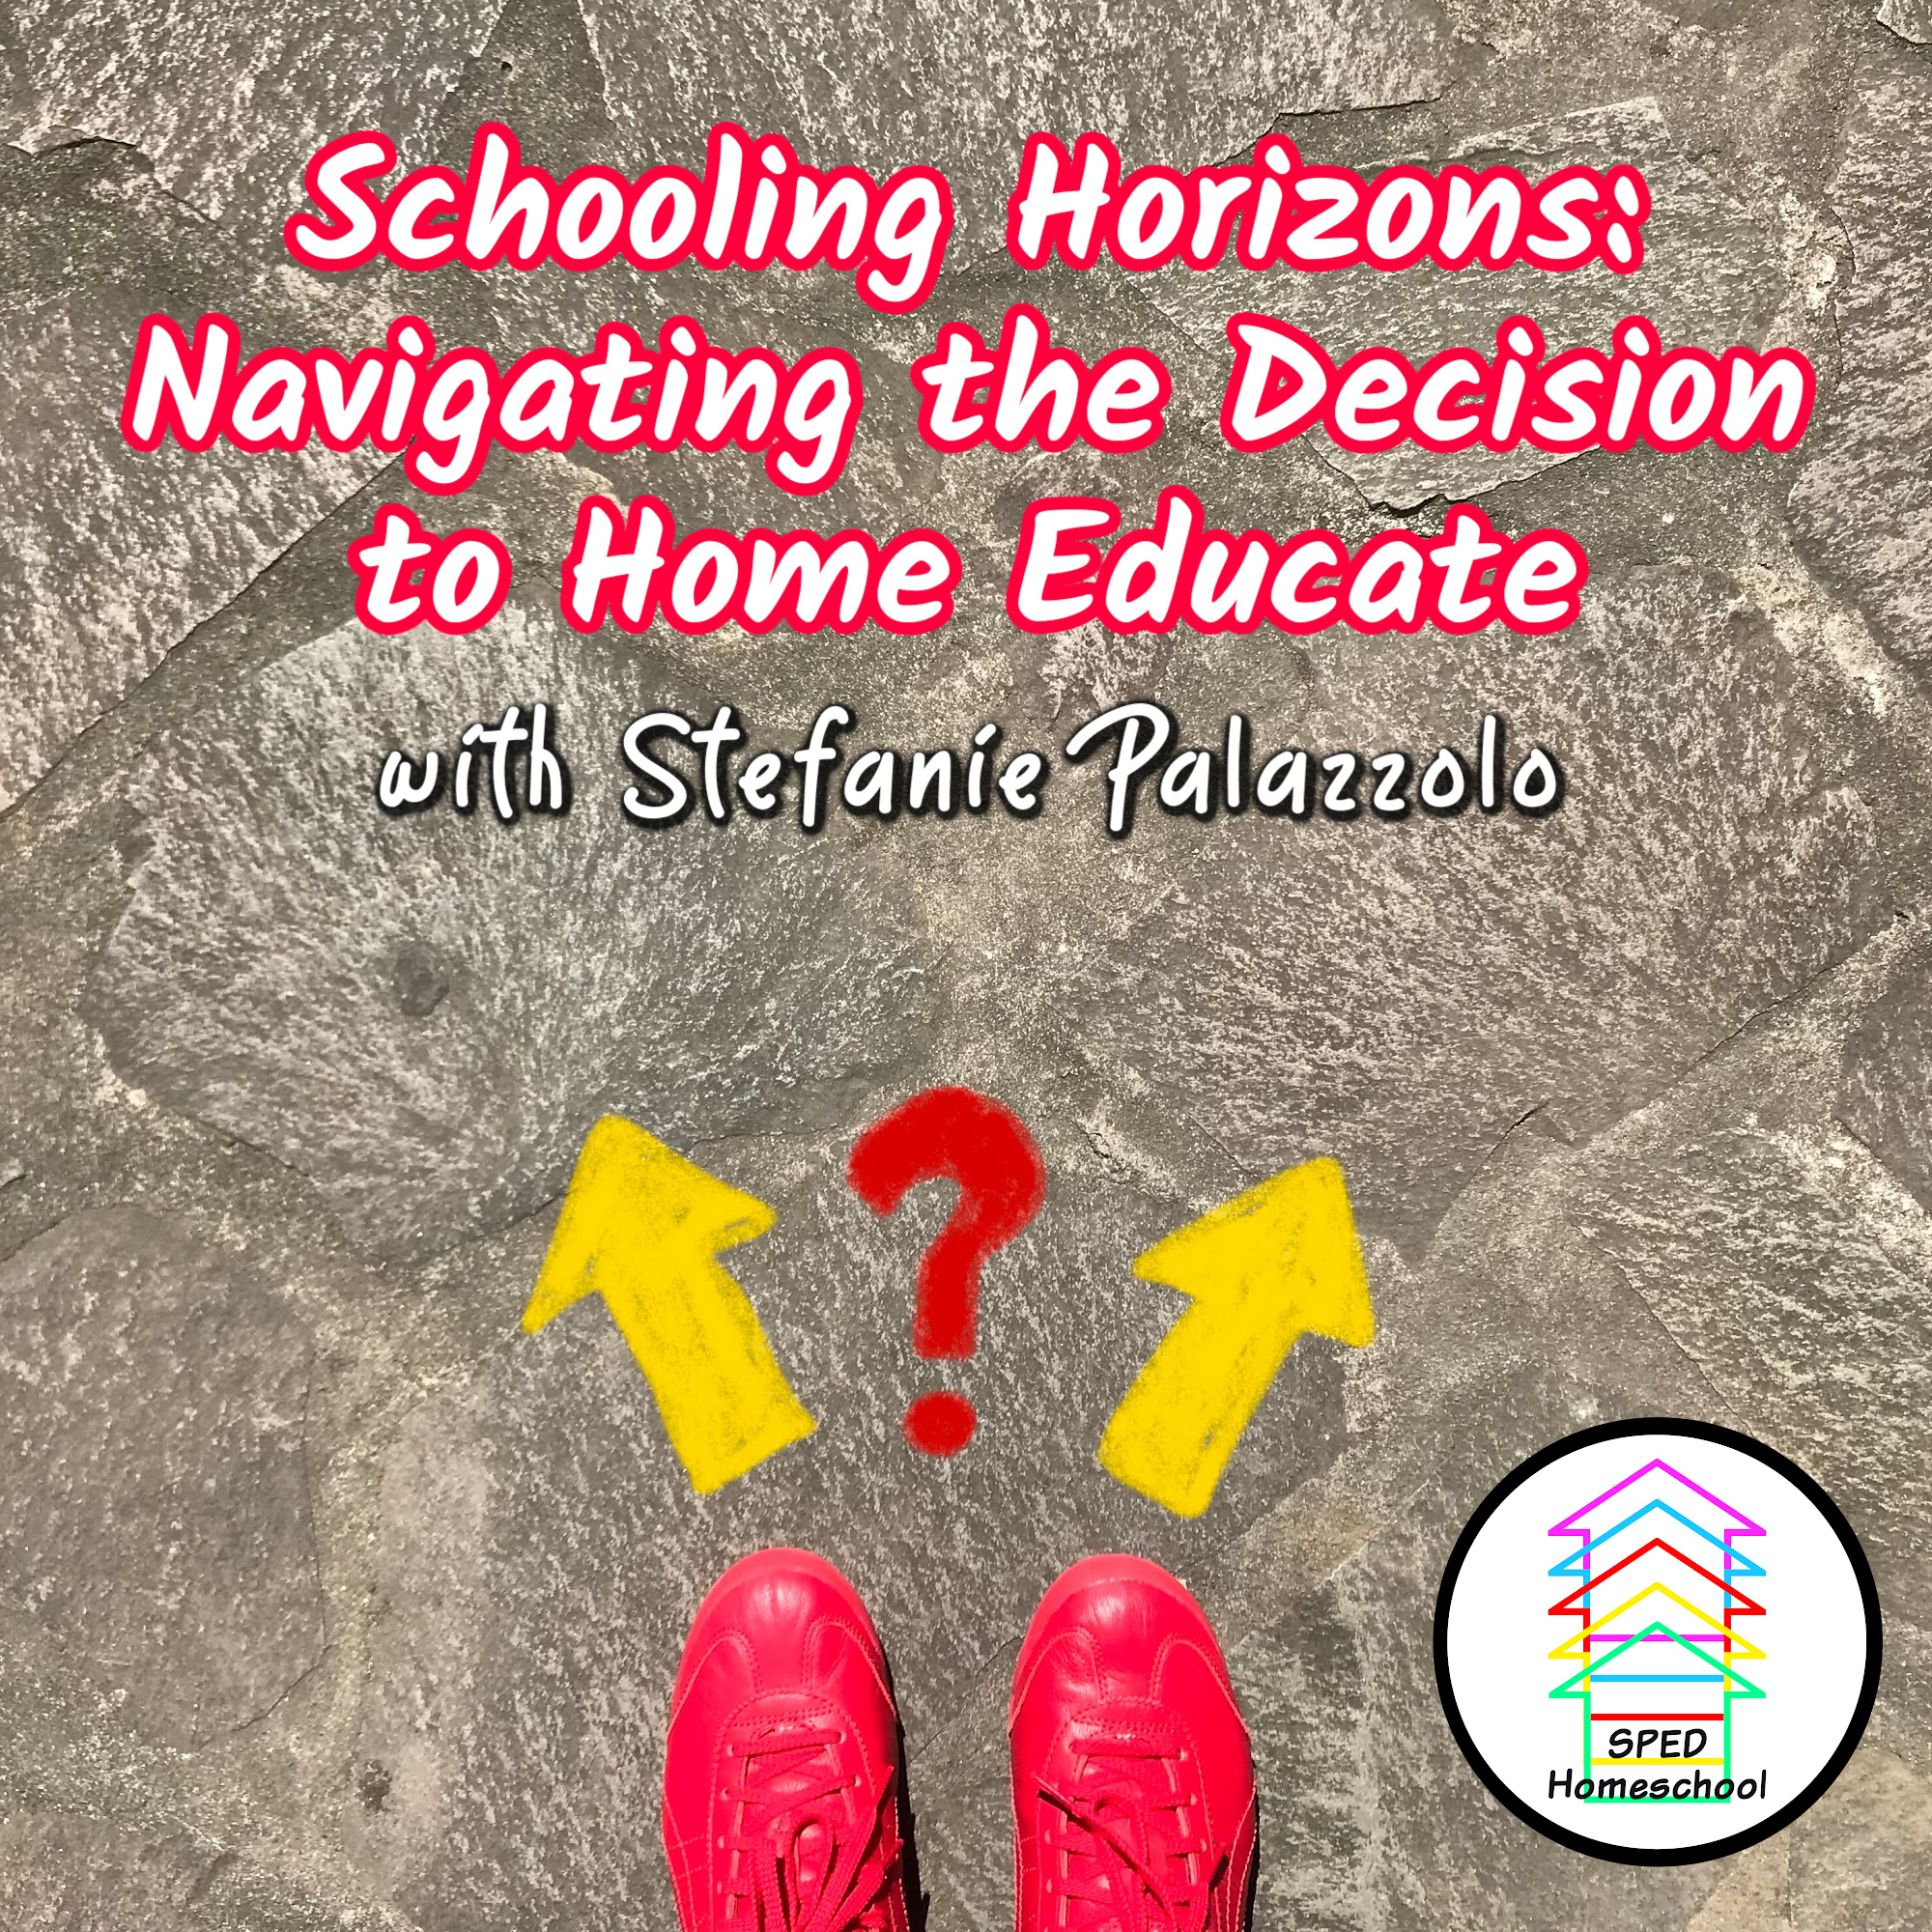 Schooling Horizons: Navigating the Decision to Home Educate